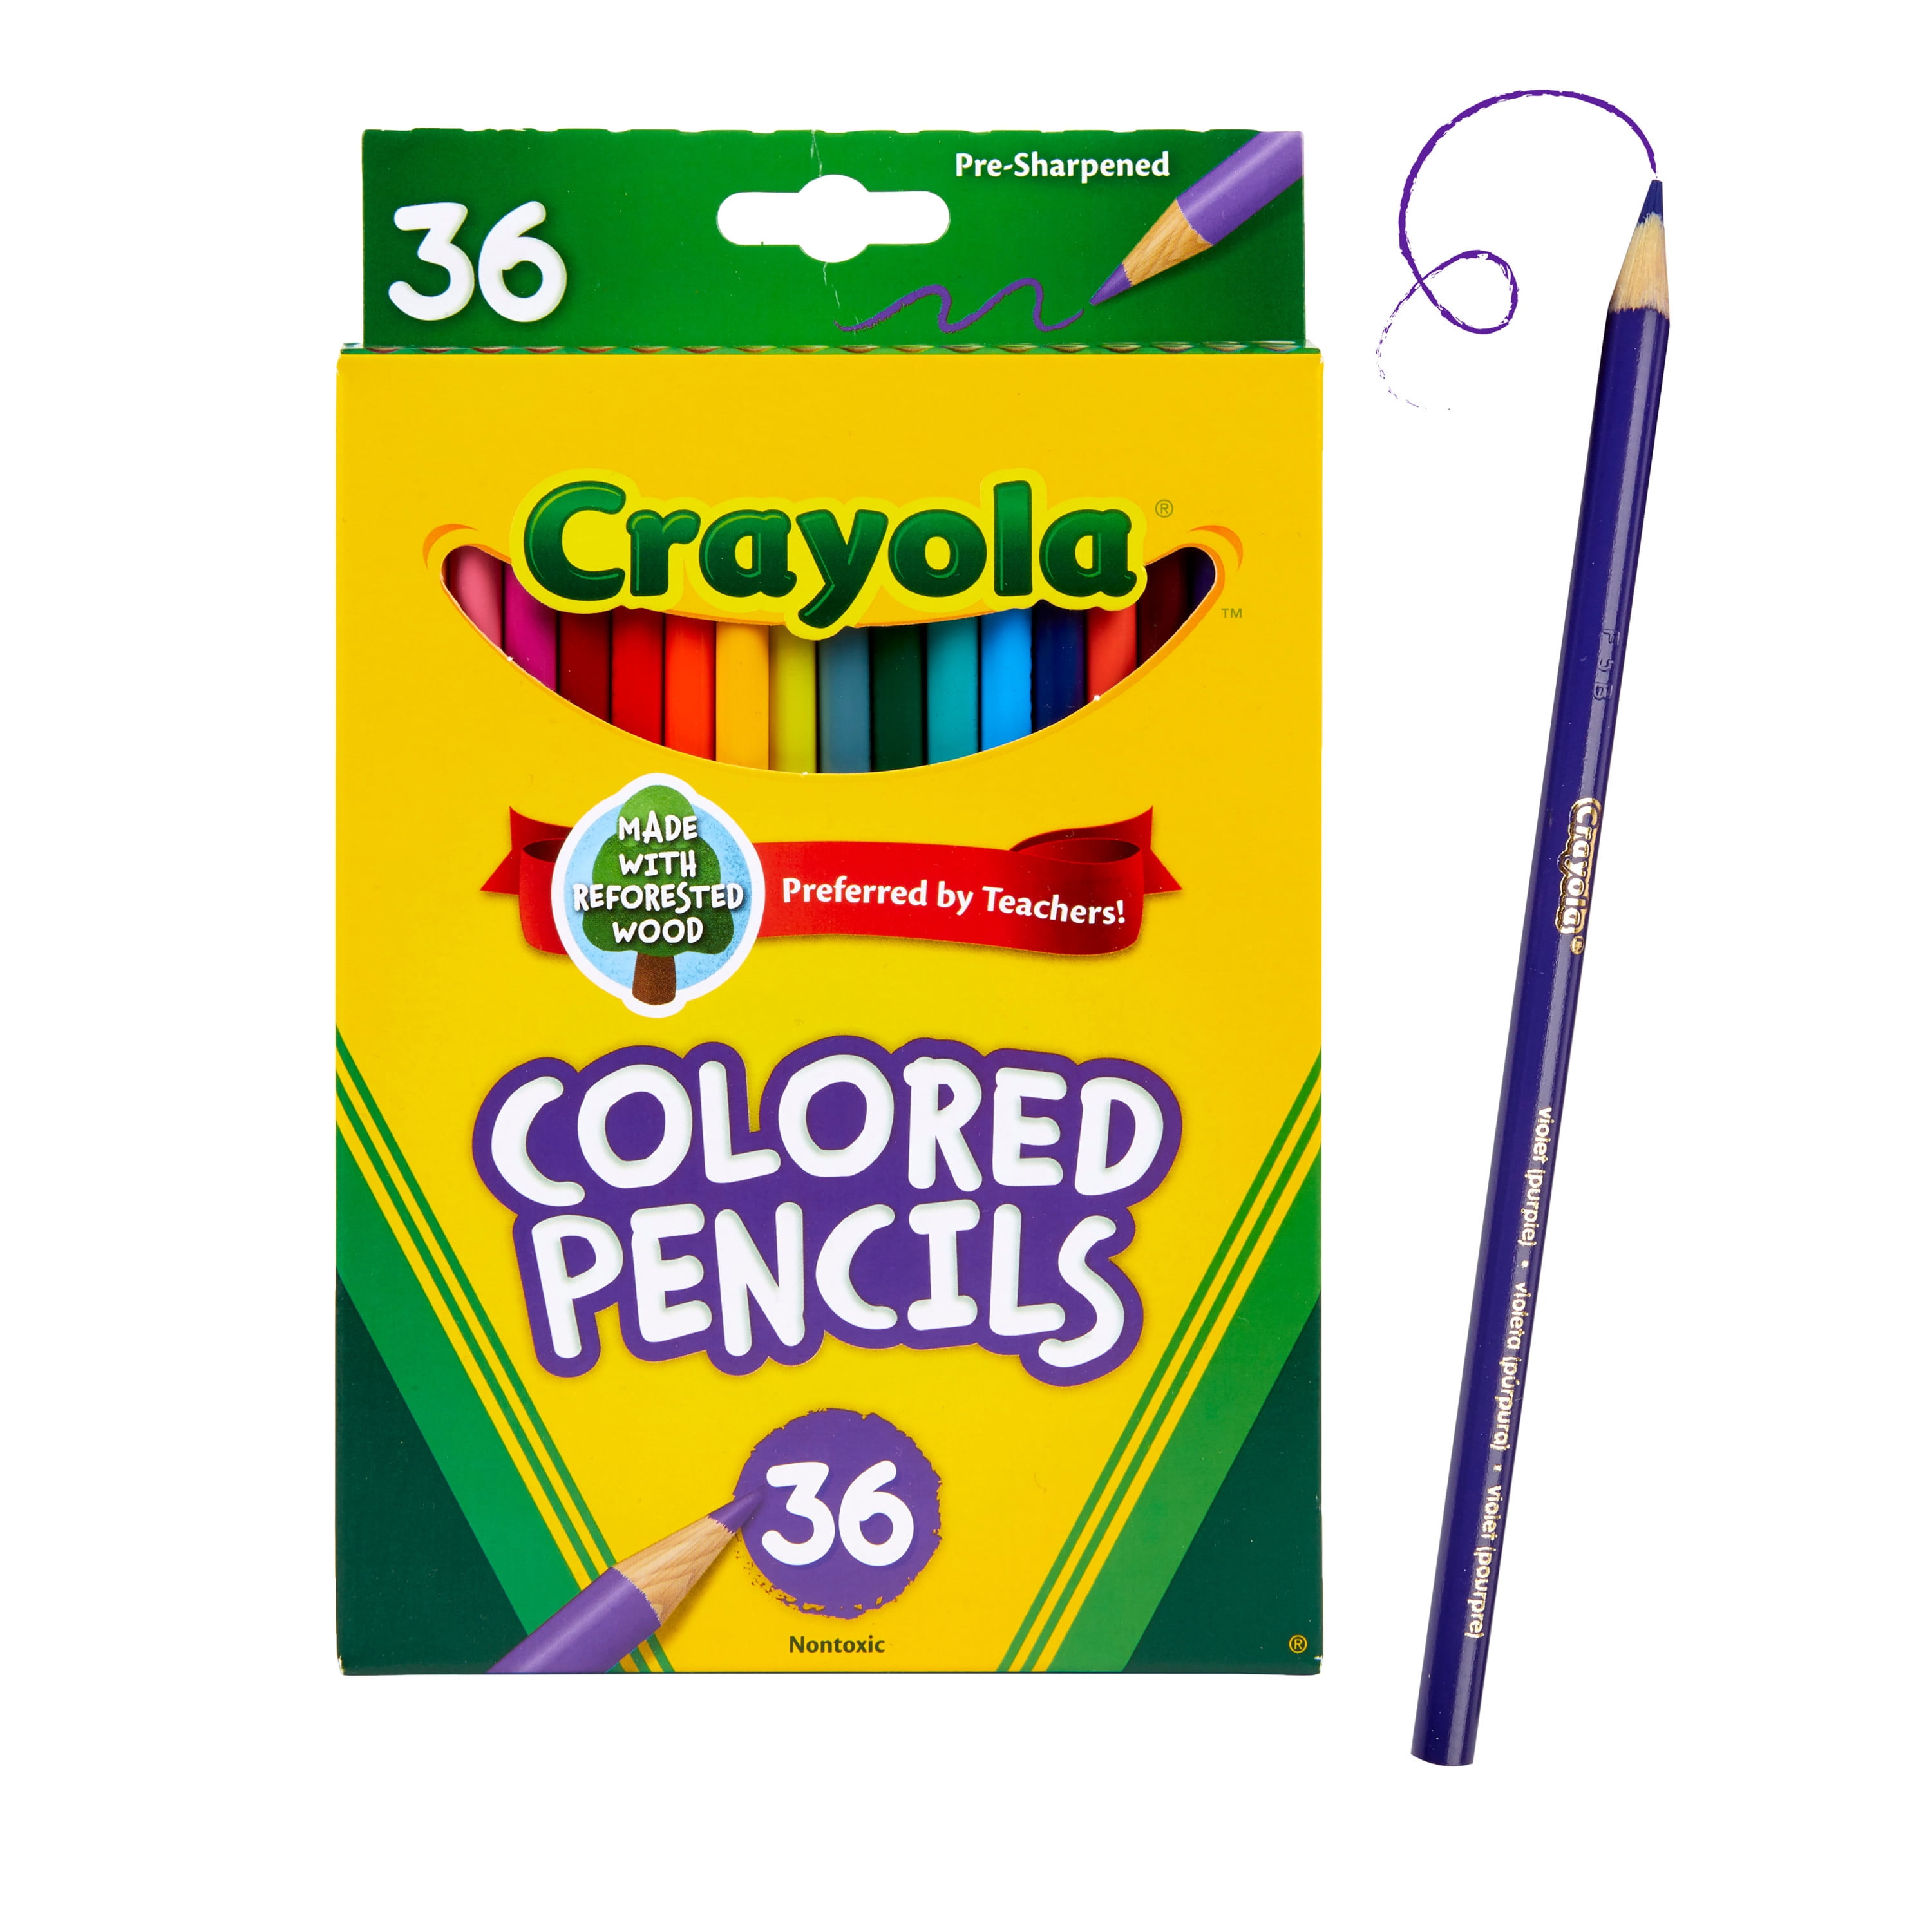 Crayola Colored Pencils – Child's Play